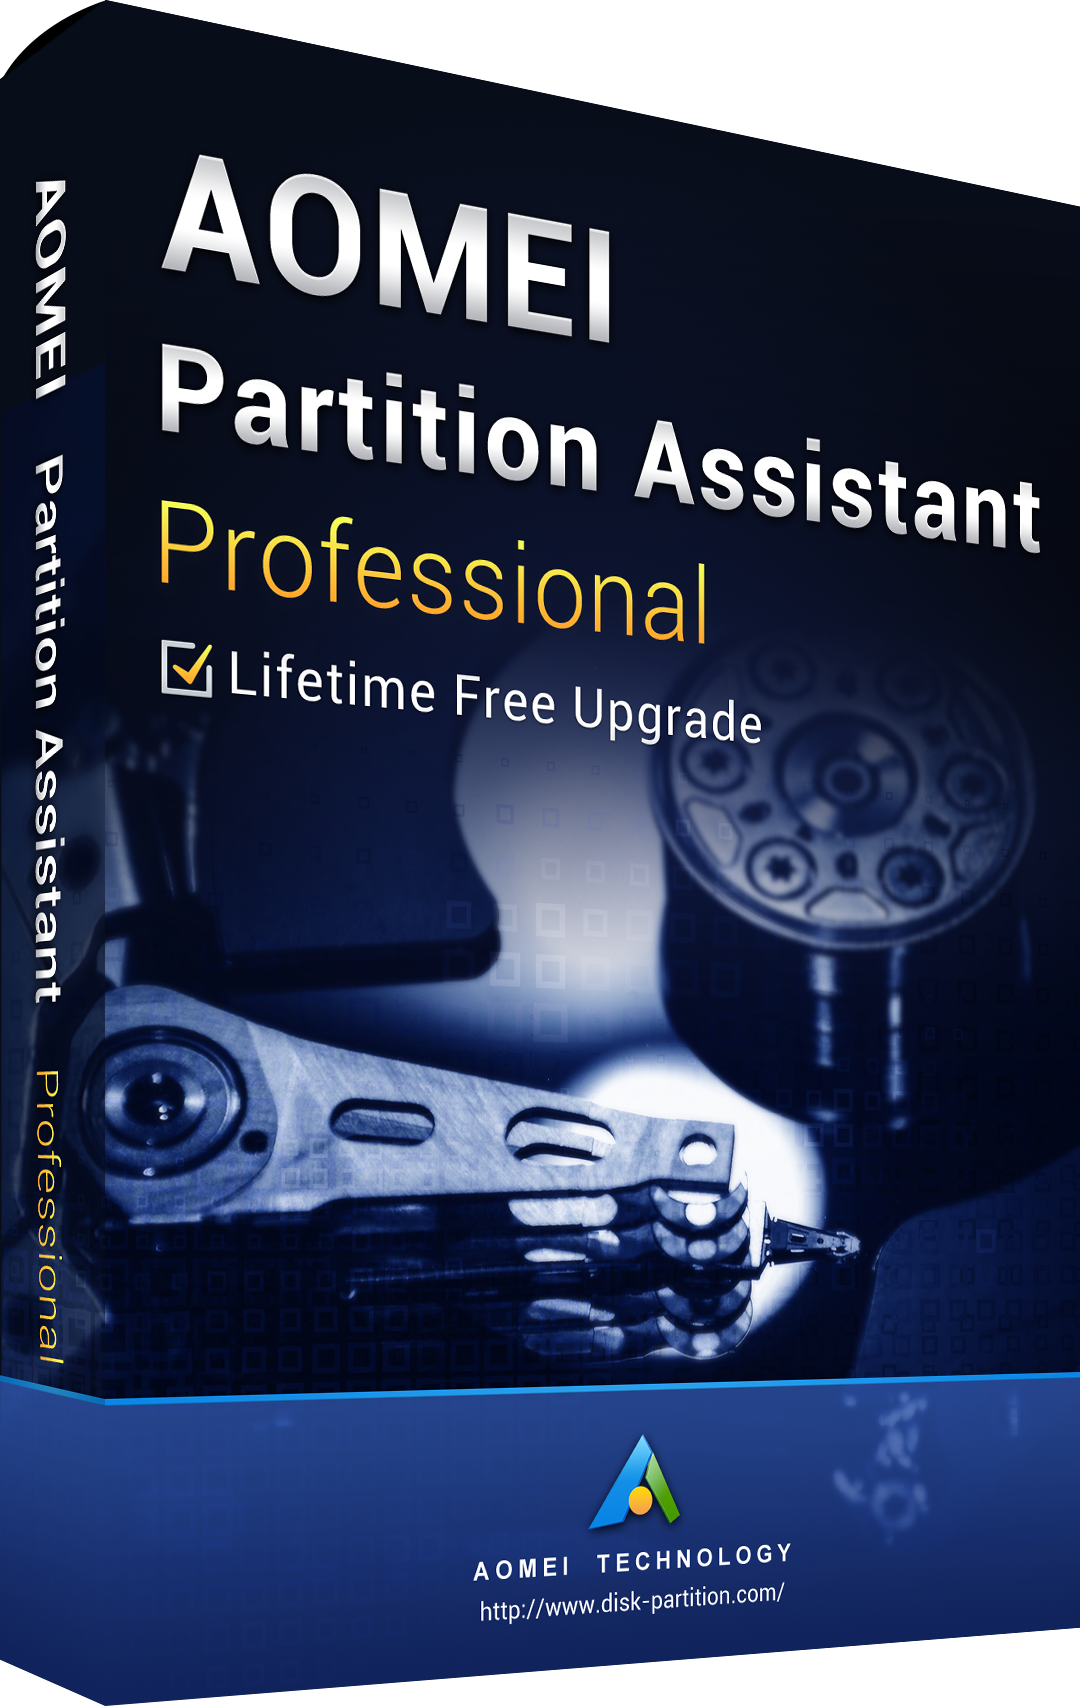 AOMEI Partition Assistant Professional + Free Lifetime Upgrades 8.8 Key Global